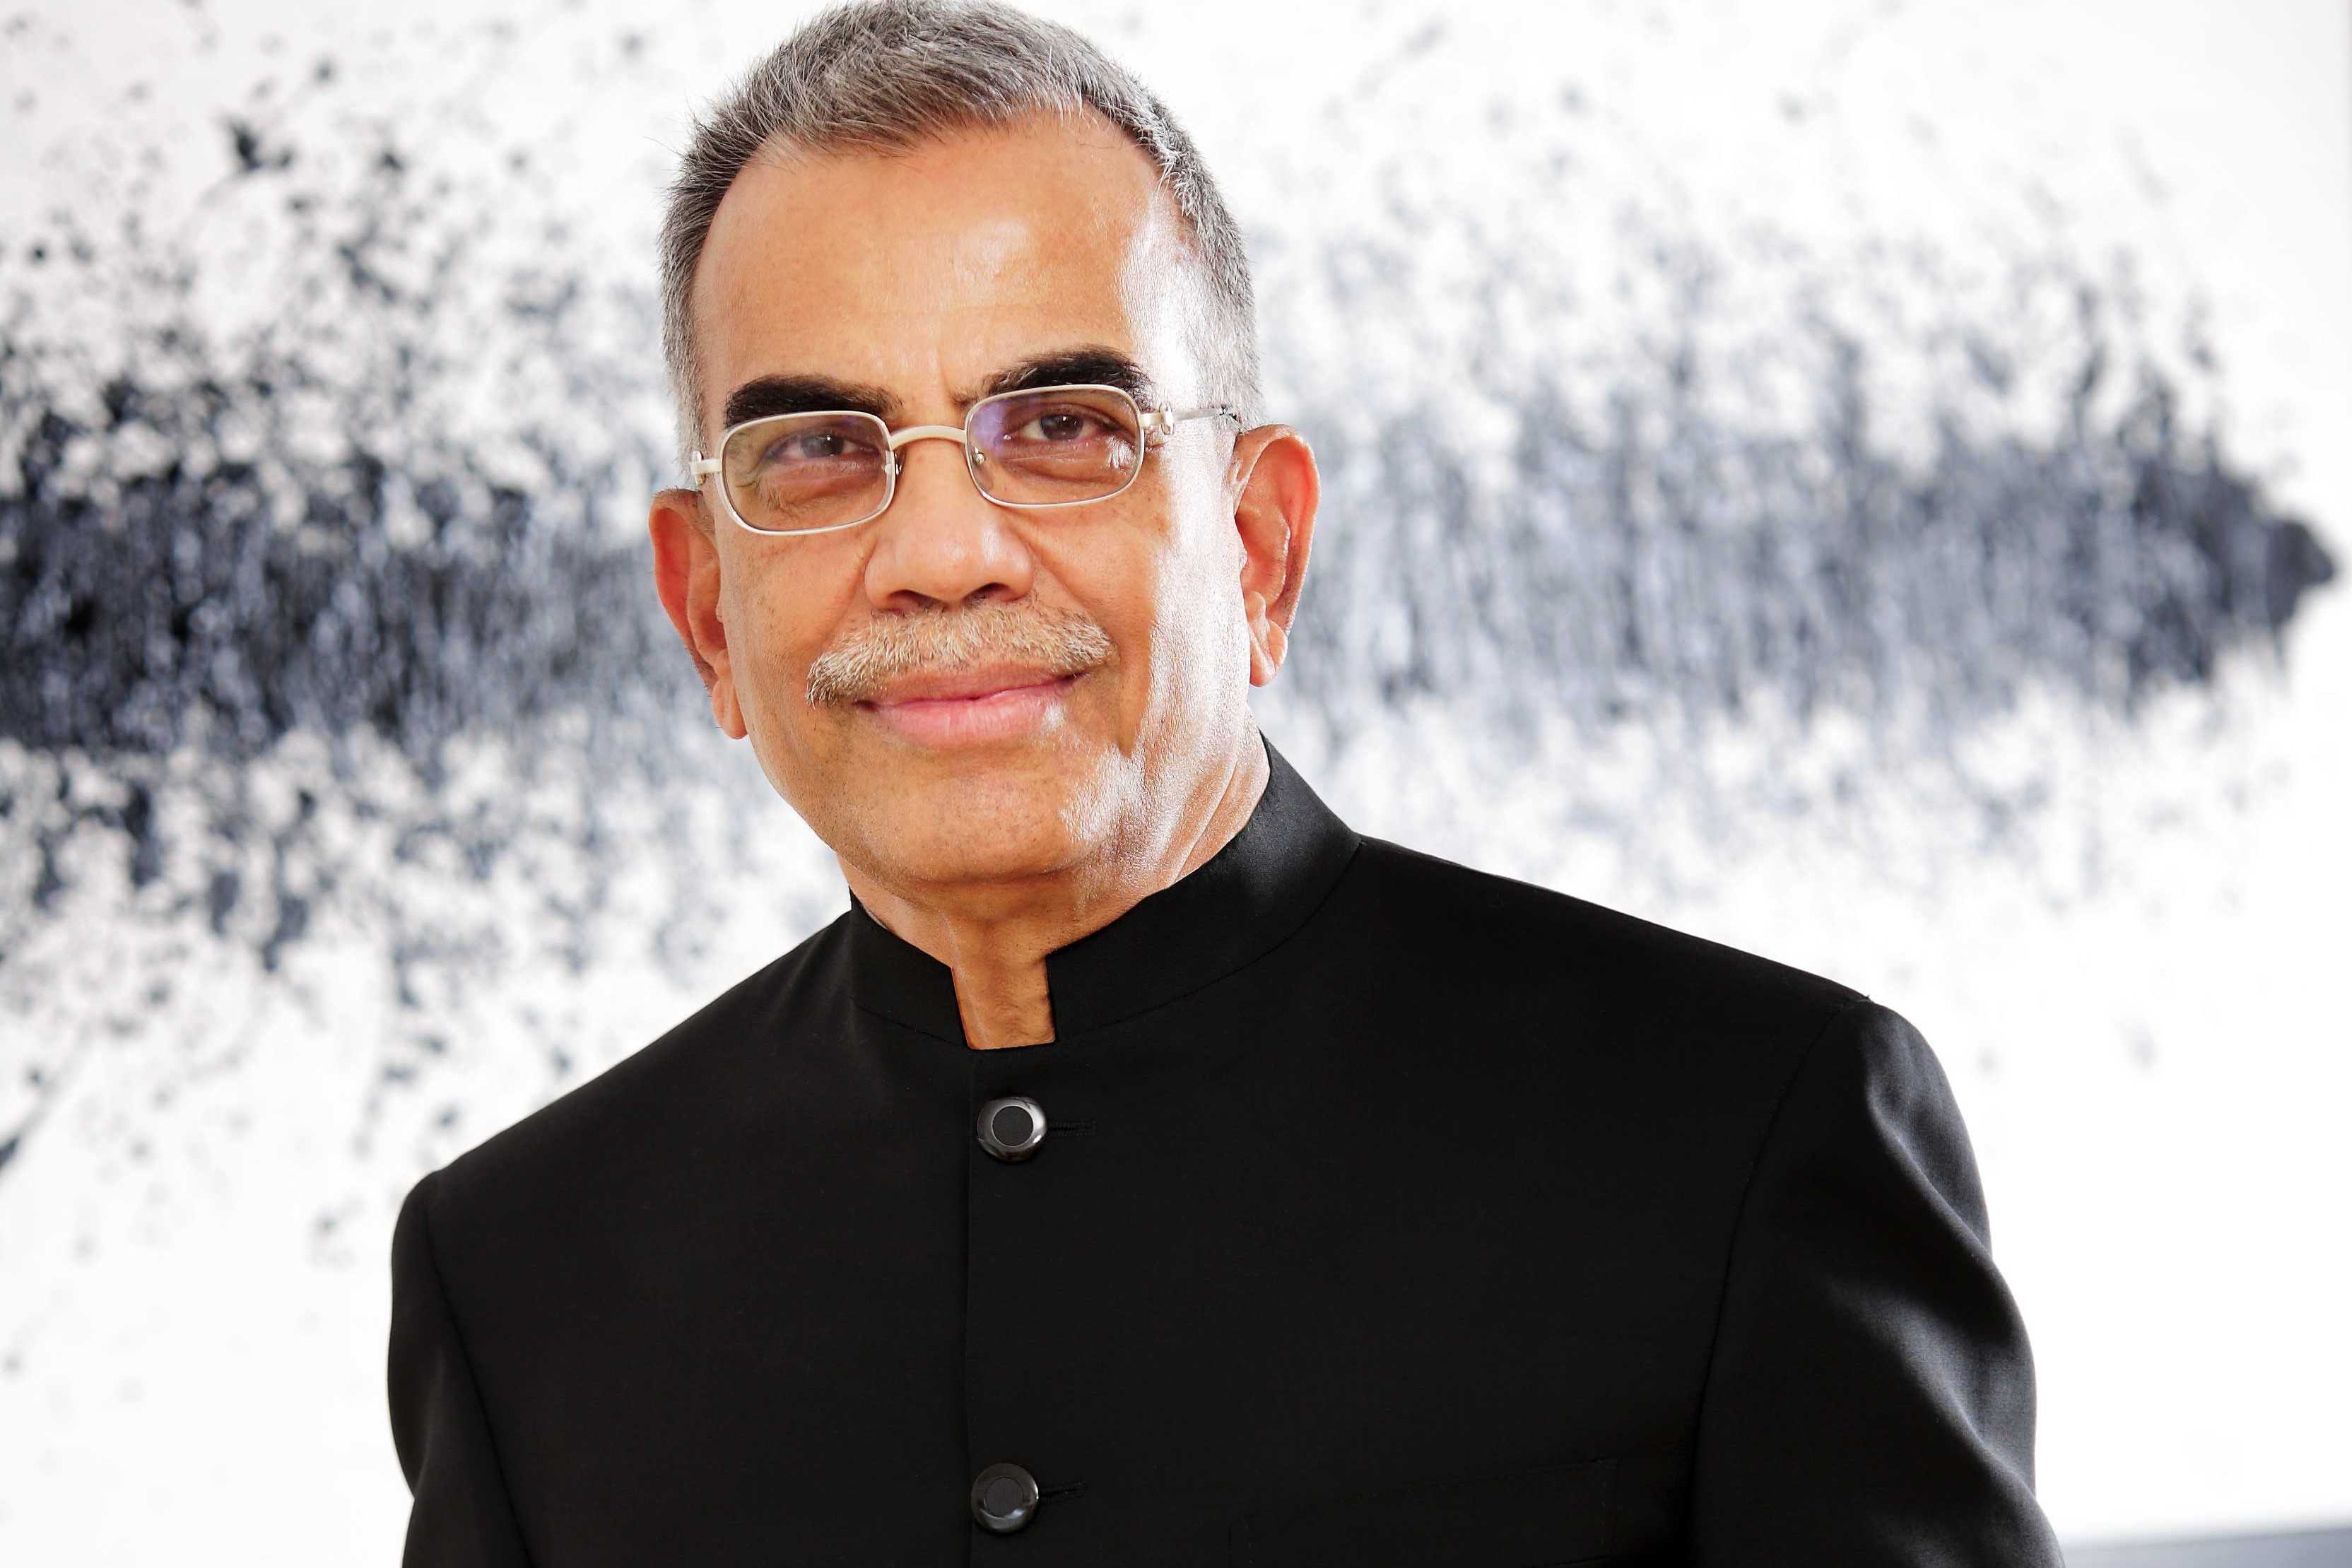 21-captivating-facts-about-p-n-c-menon